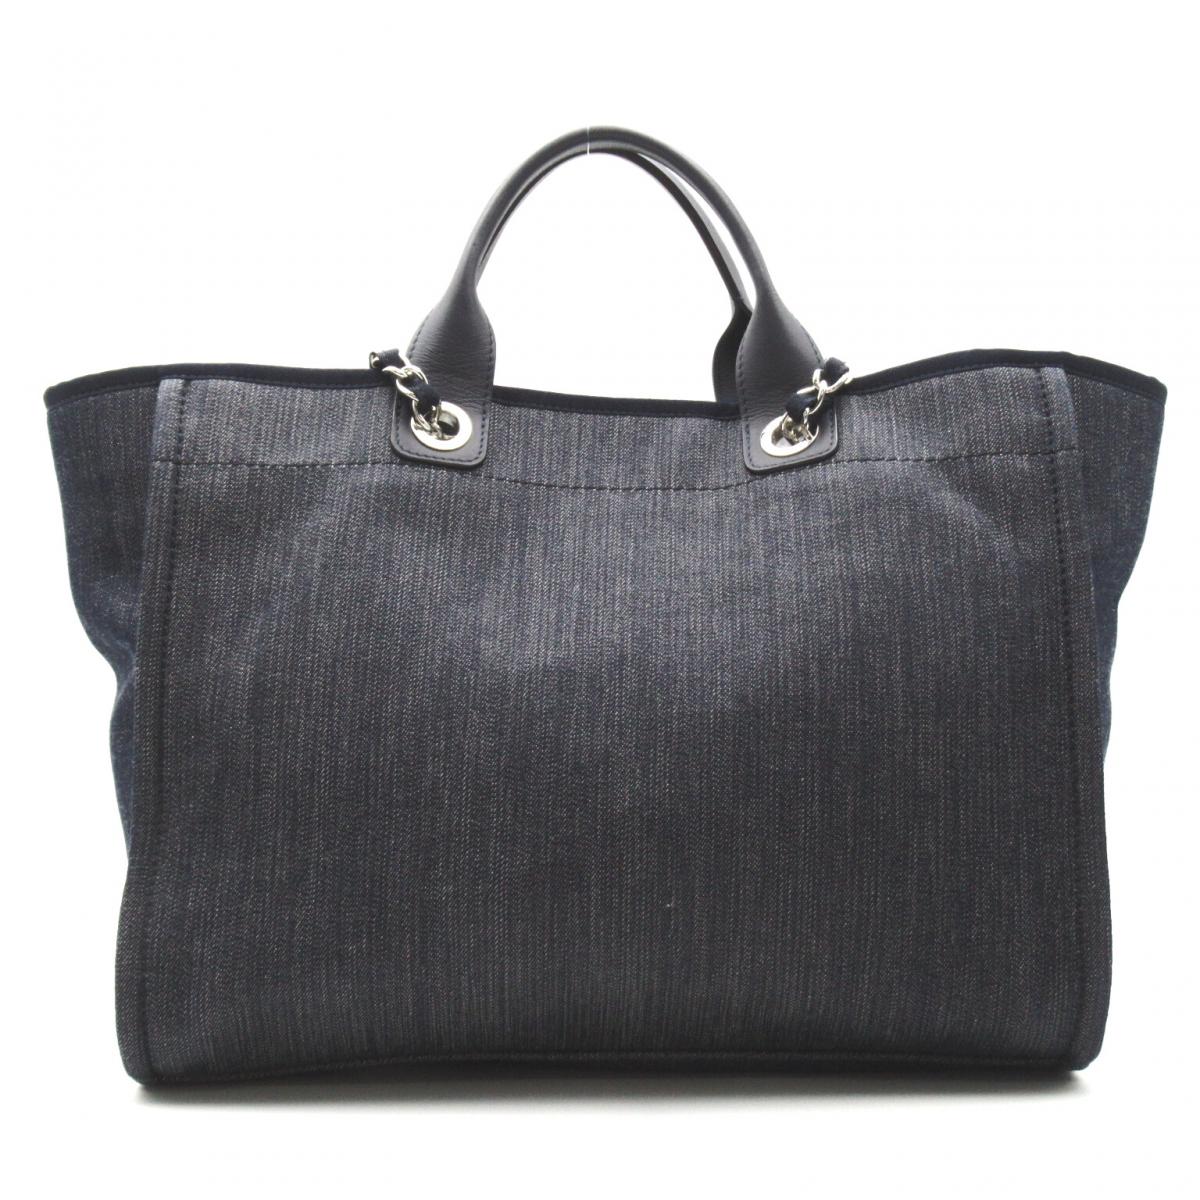 Deauville Shopping Tote A66941